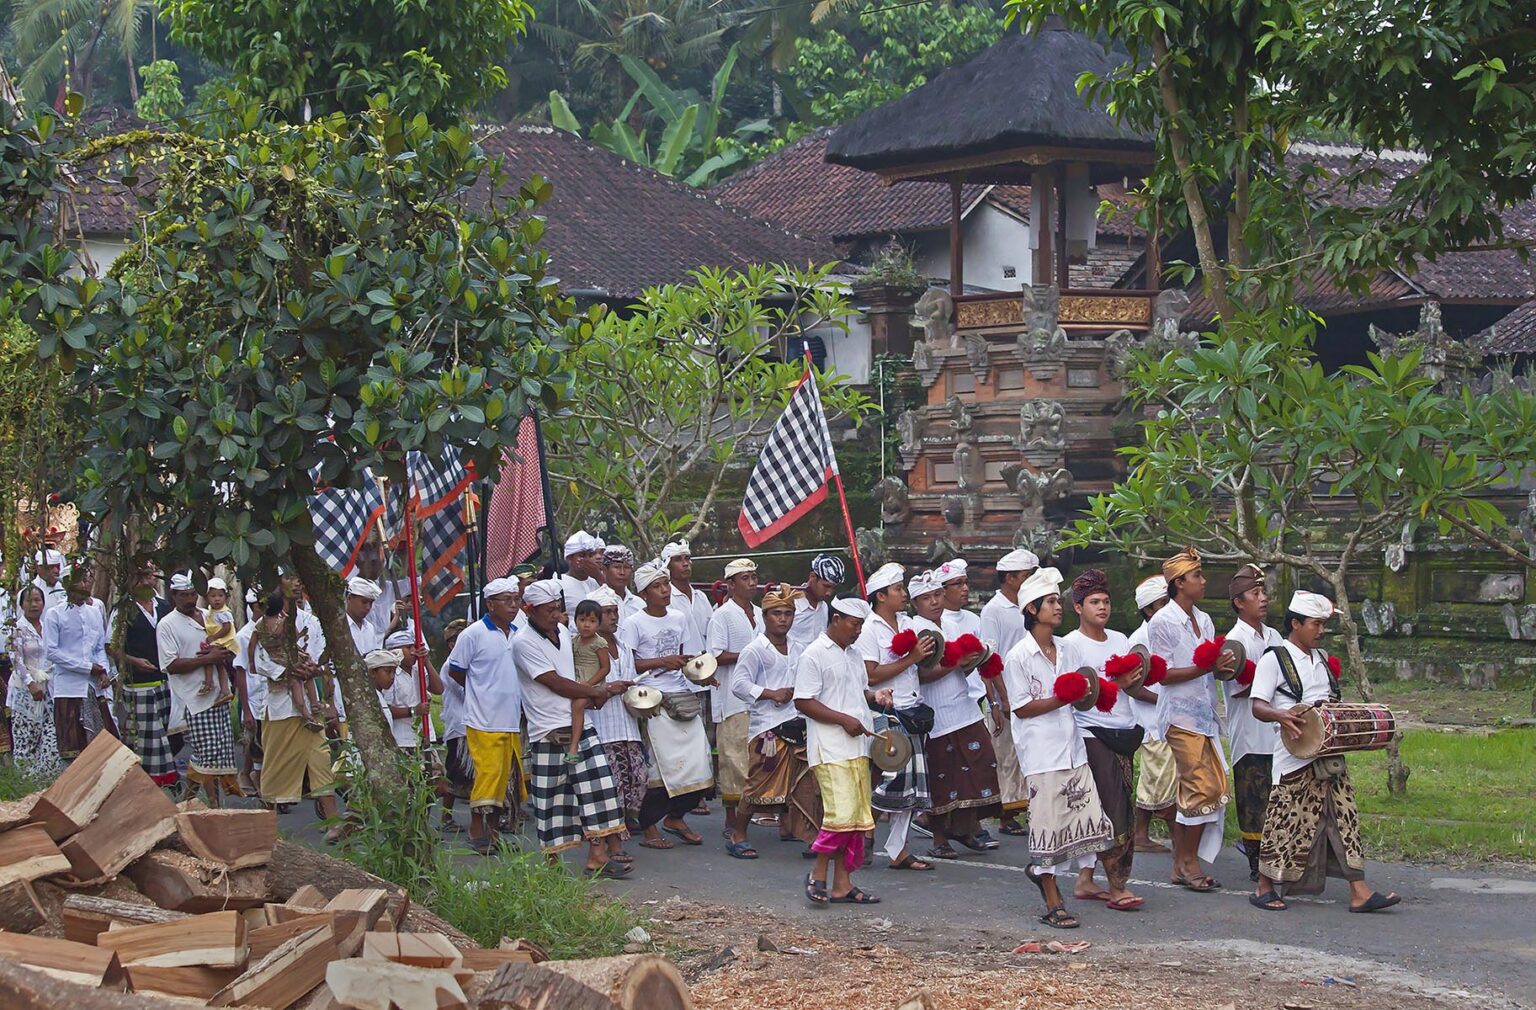 DRUMS and CYMBALS are played during a HINDU PROCESSION for a temple anniversary - UBUD, BALI